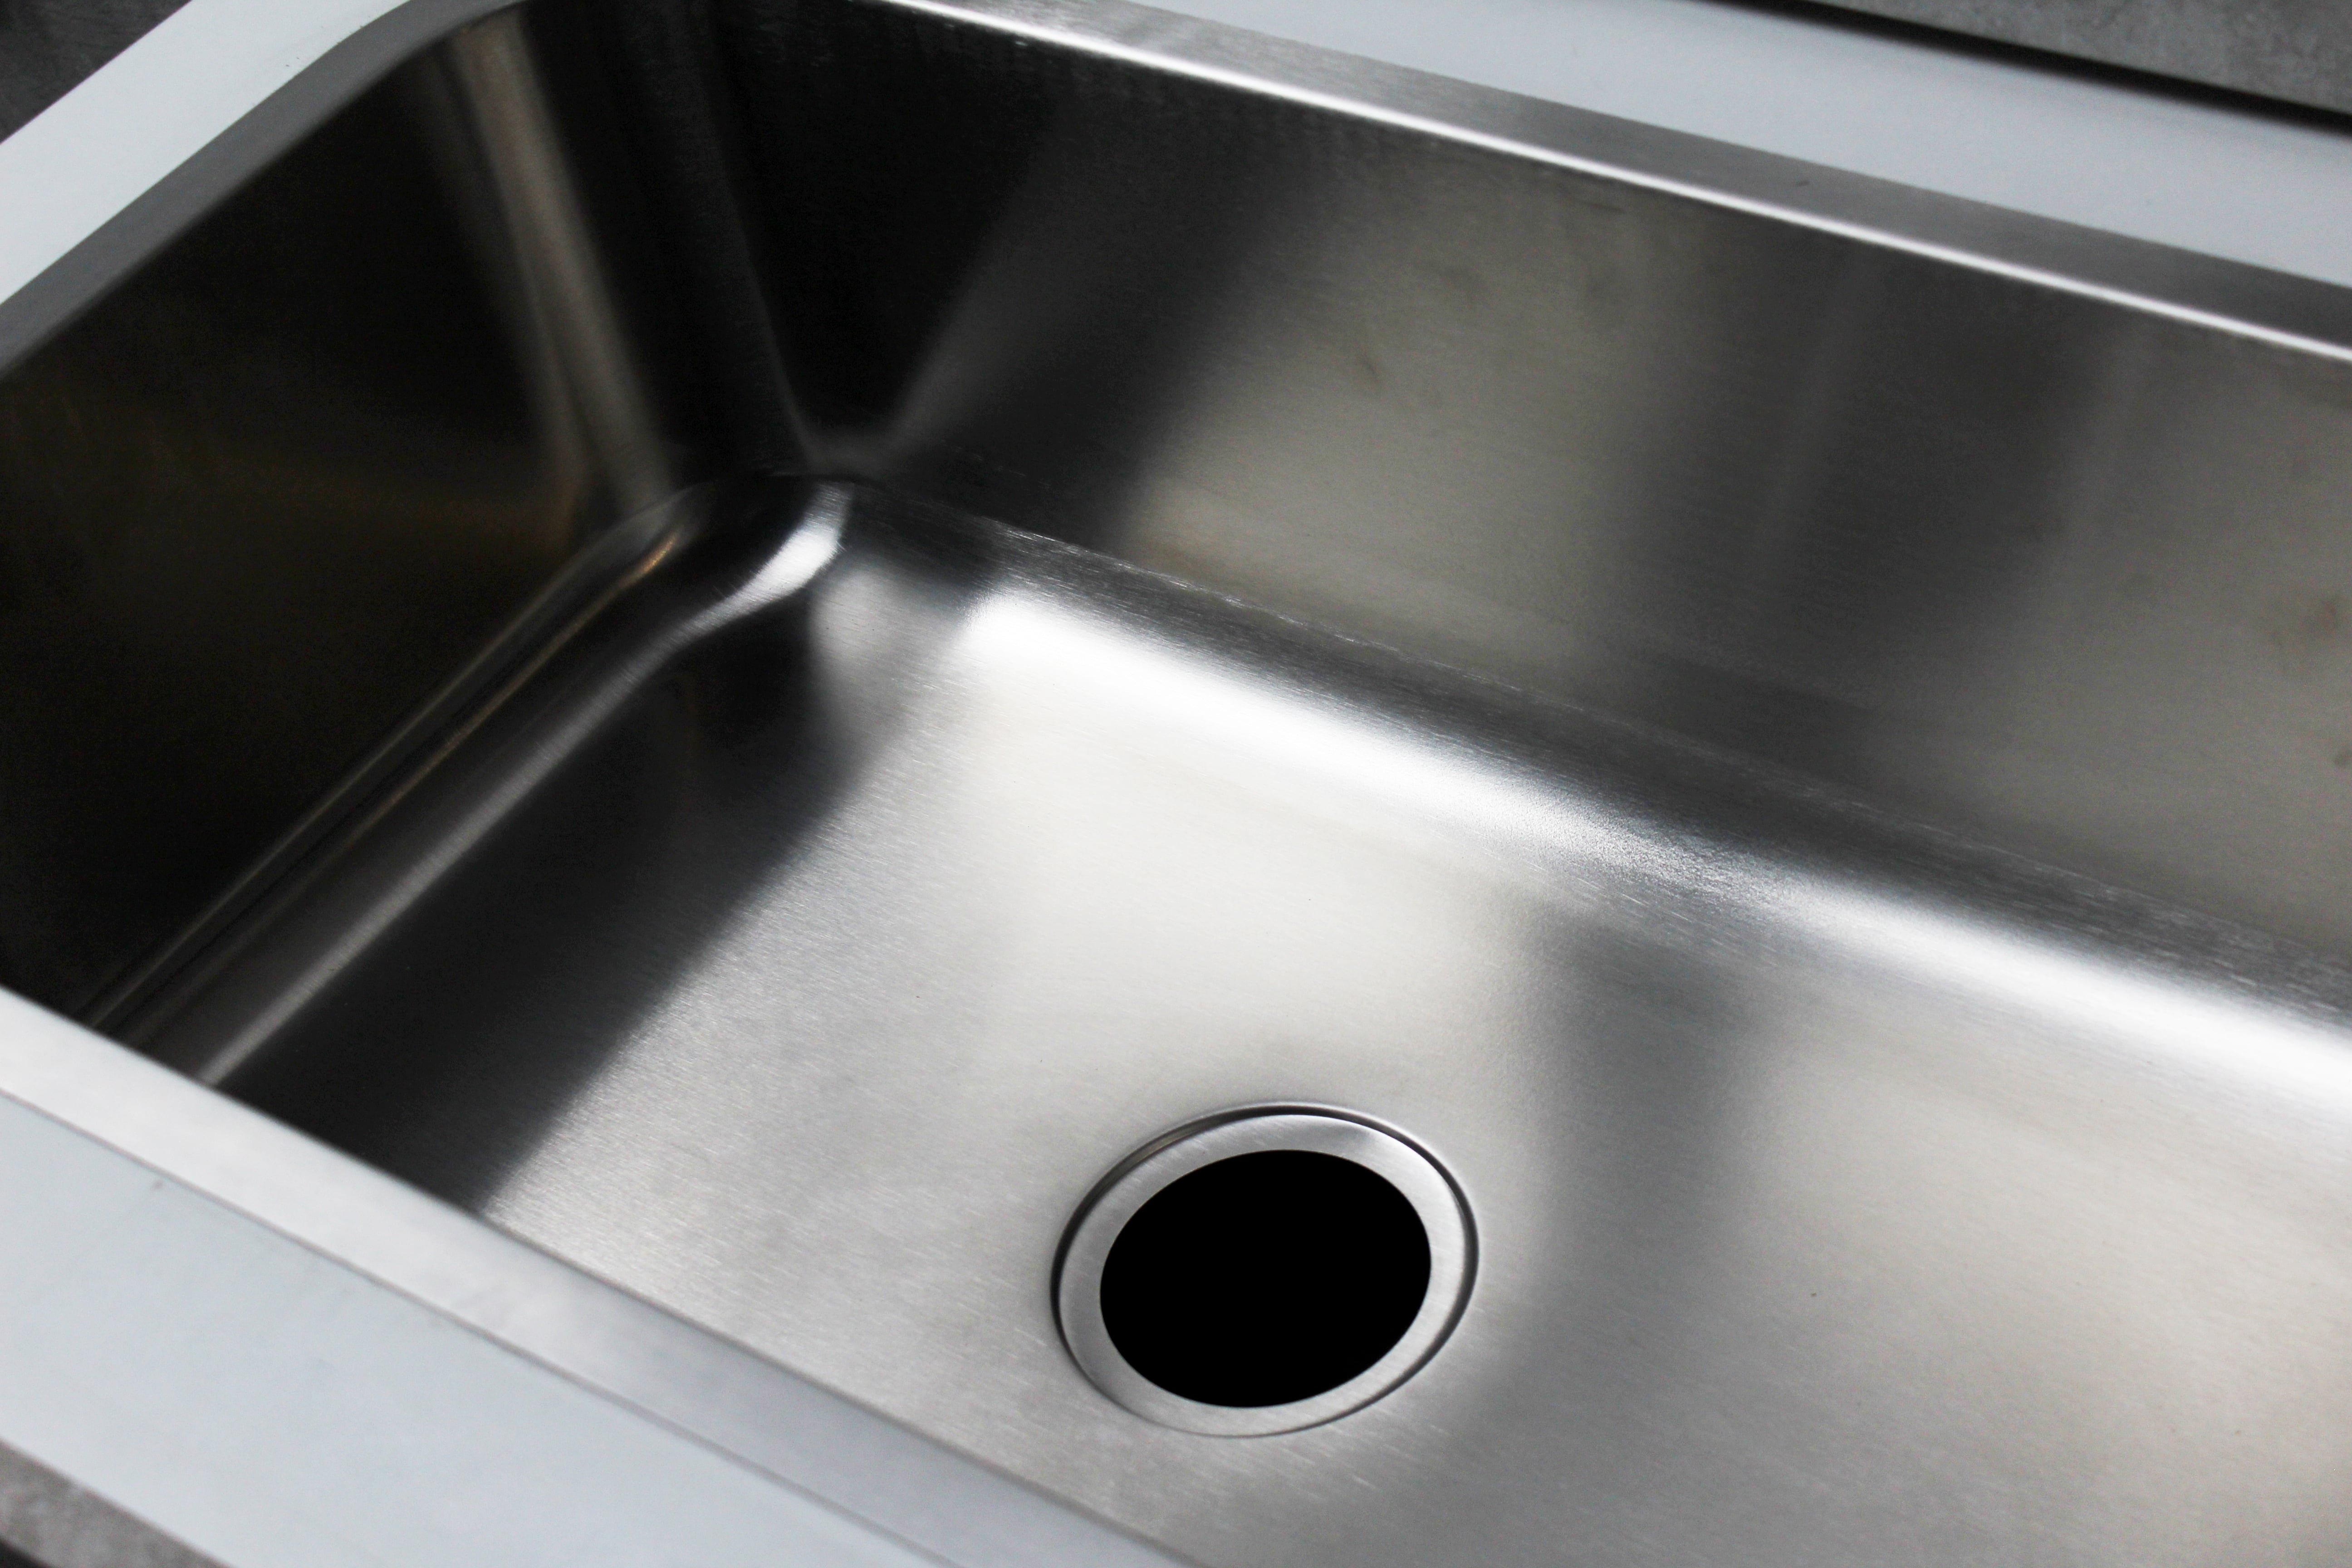 Buy Ak Sink 4136 Electroplated - SS304 Online | Construction Finishes | Qetaat.com